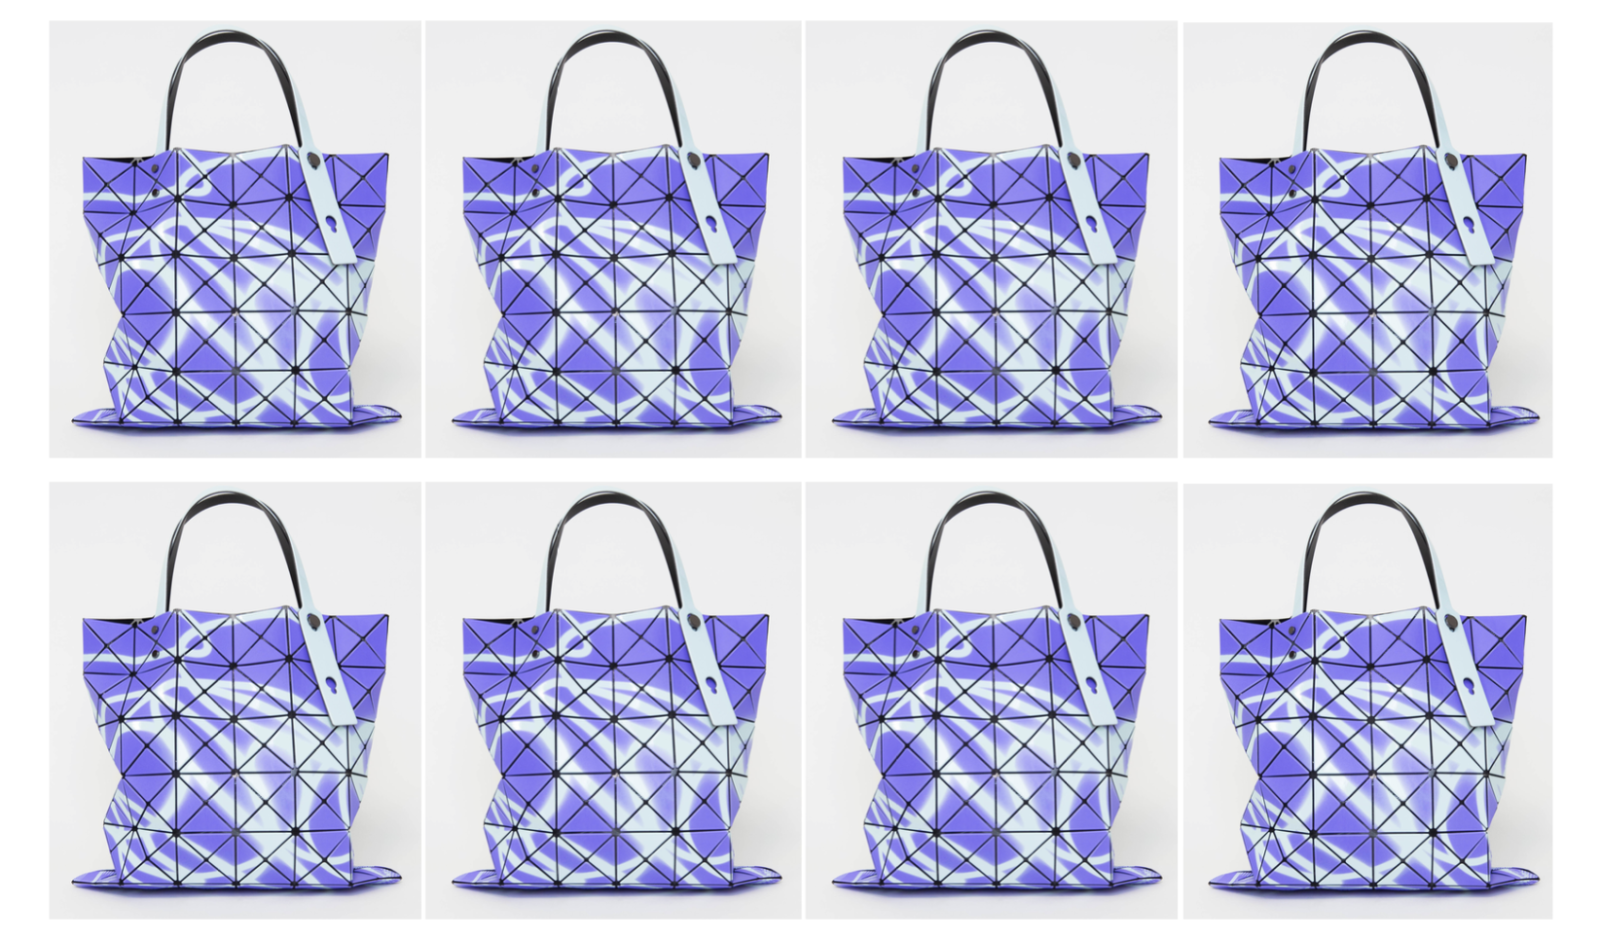 Issey Miyake Lands Unfair Competition Win in Japan Over Copycat